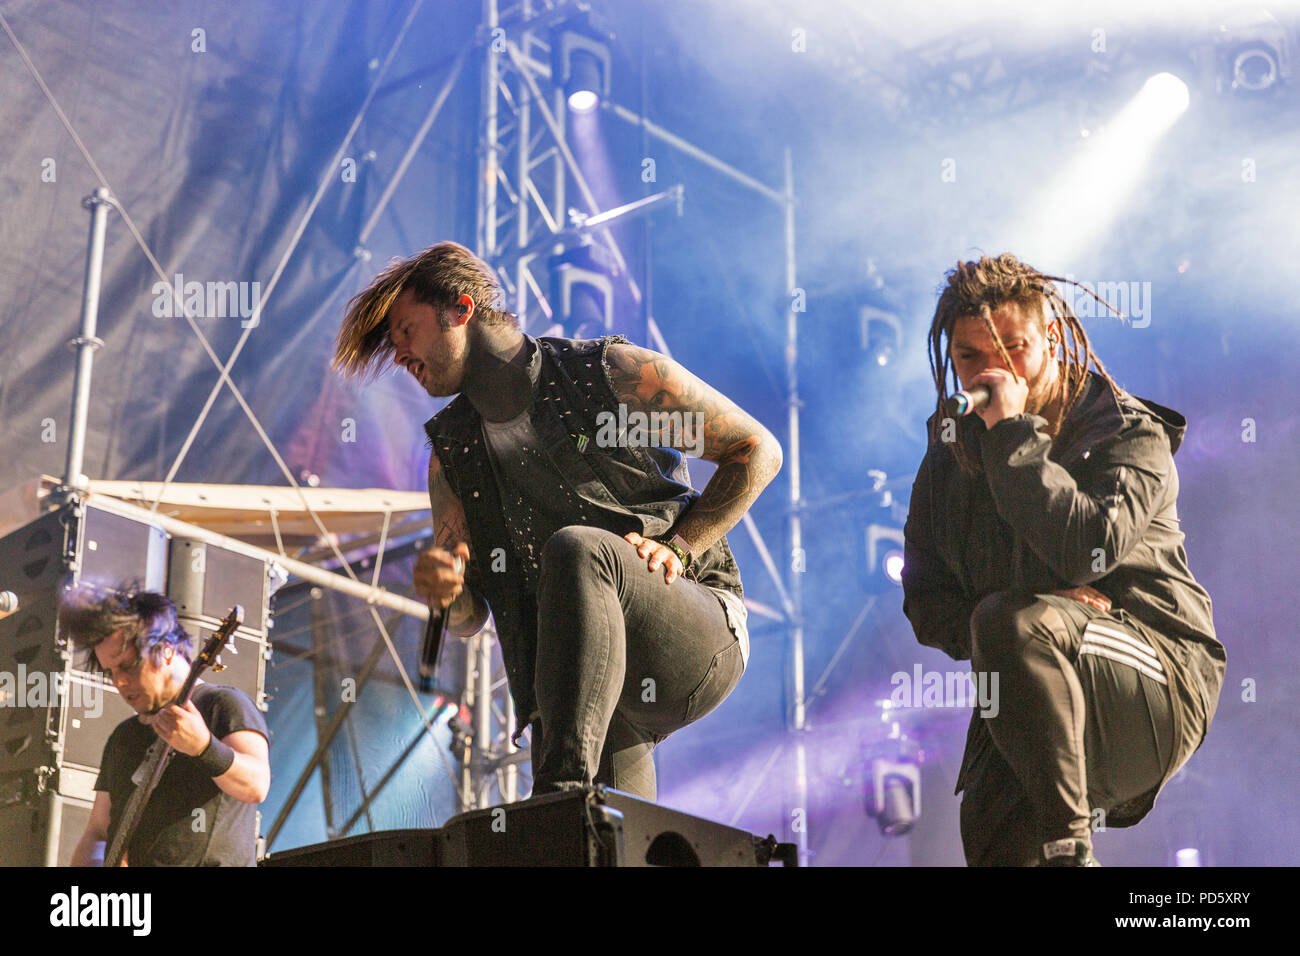 KIEV, UKRAINE - JULY 06, 2018: German metalcore rock band Eskimo Callboy performs live at the Atlas Weekend Festival in National Expocenter. Stock Photo